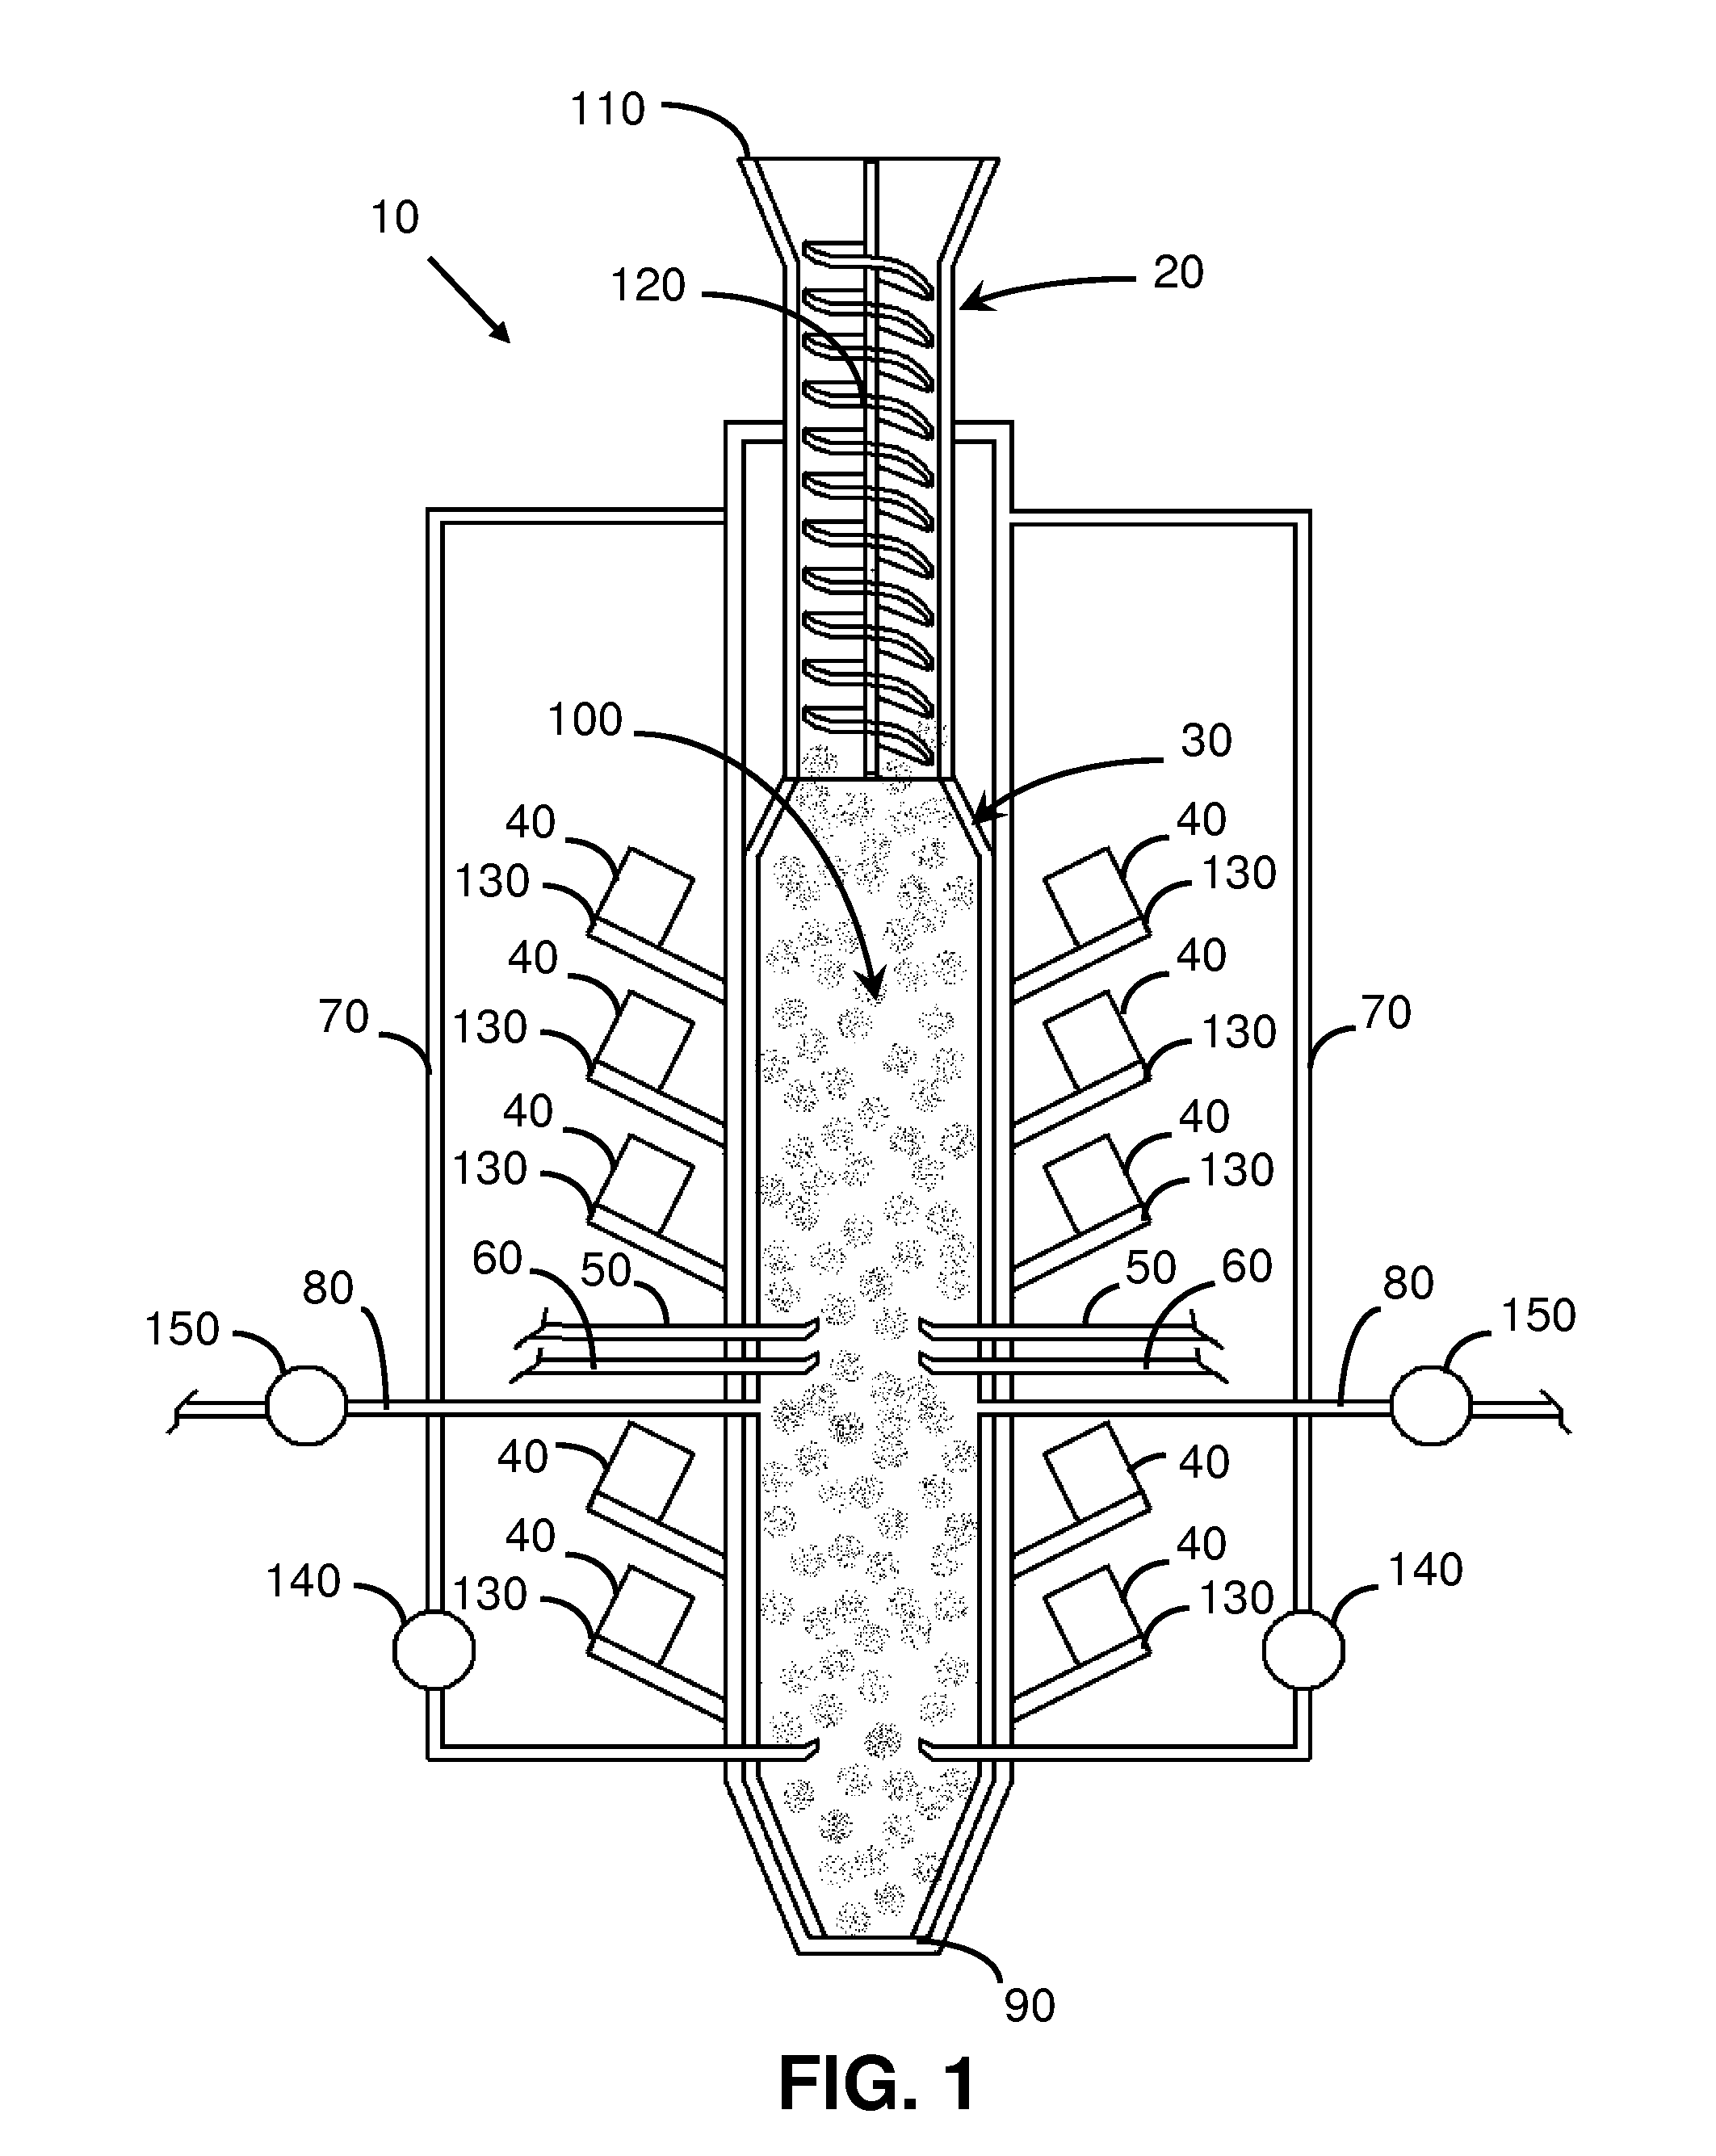 Method and apparatus for plasma gasification of carbonic material by means of microwave radiation